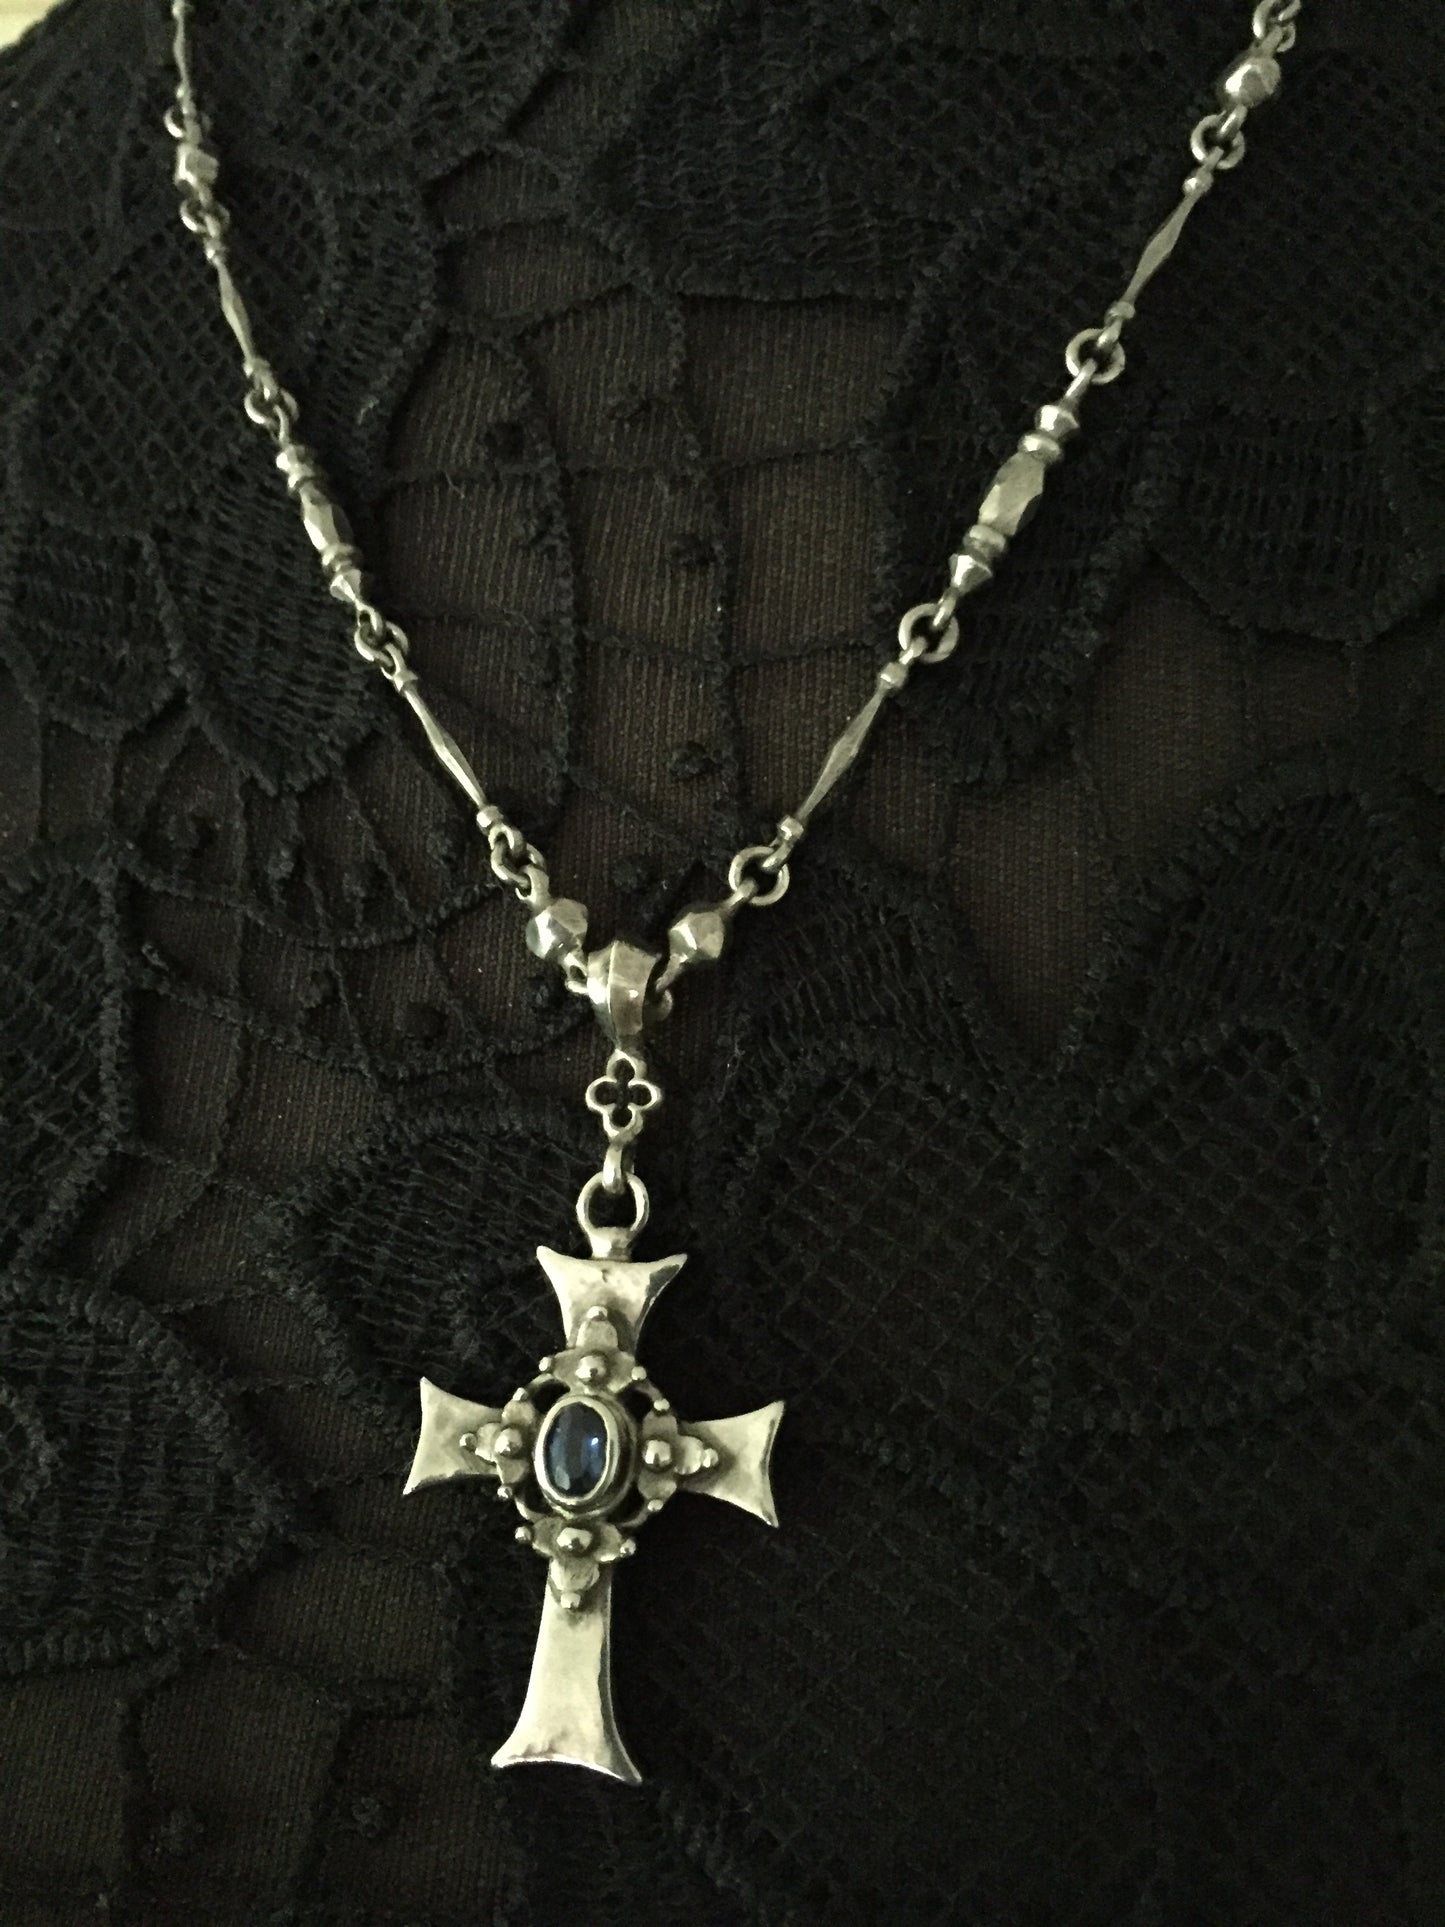 Necklace - Gothic Iolite Cross by Roman Paul